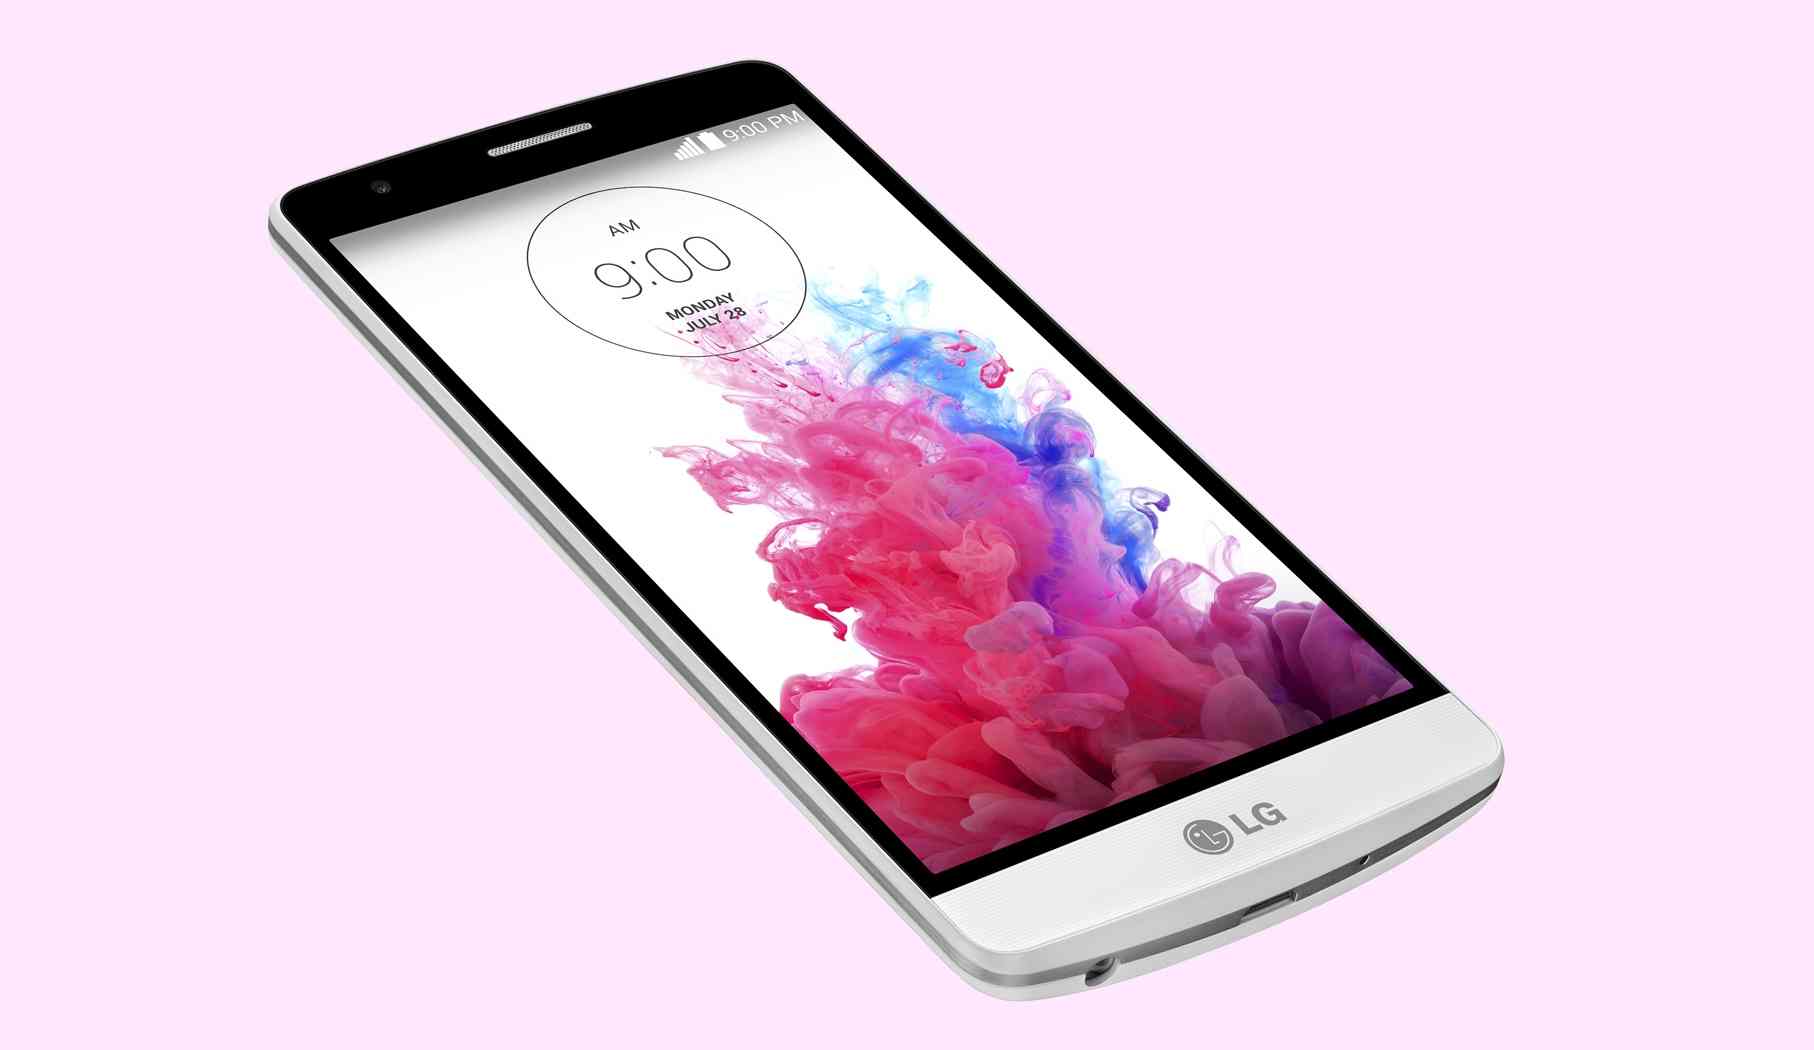 LG G3 Beat formally launched for Rs 25,000; inherits many features of G3